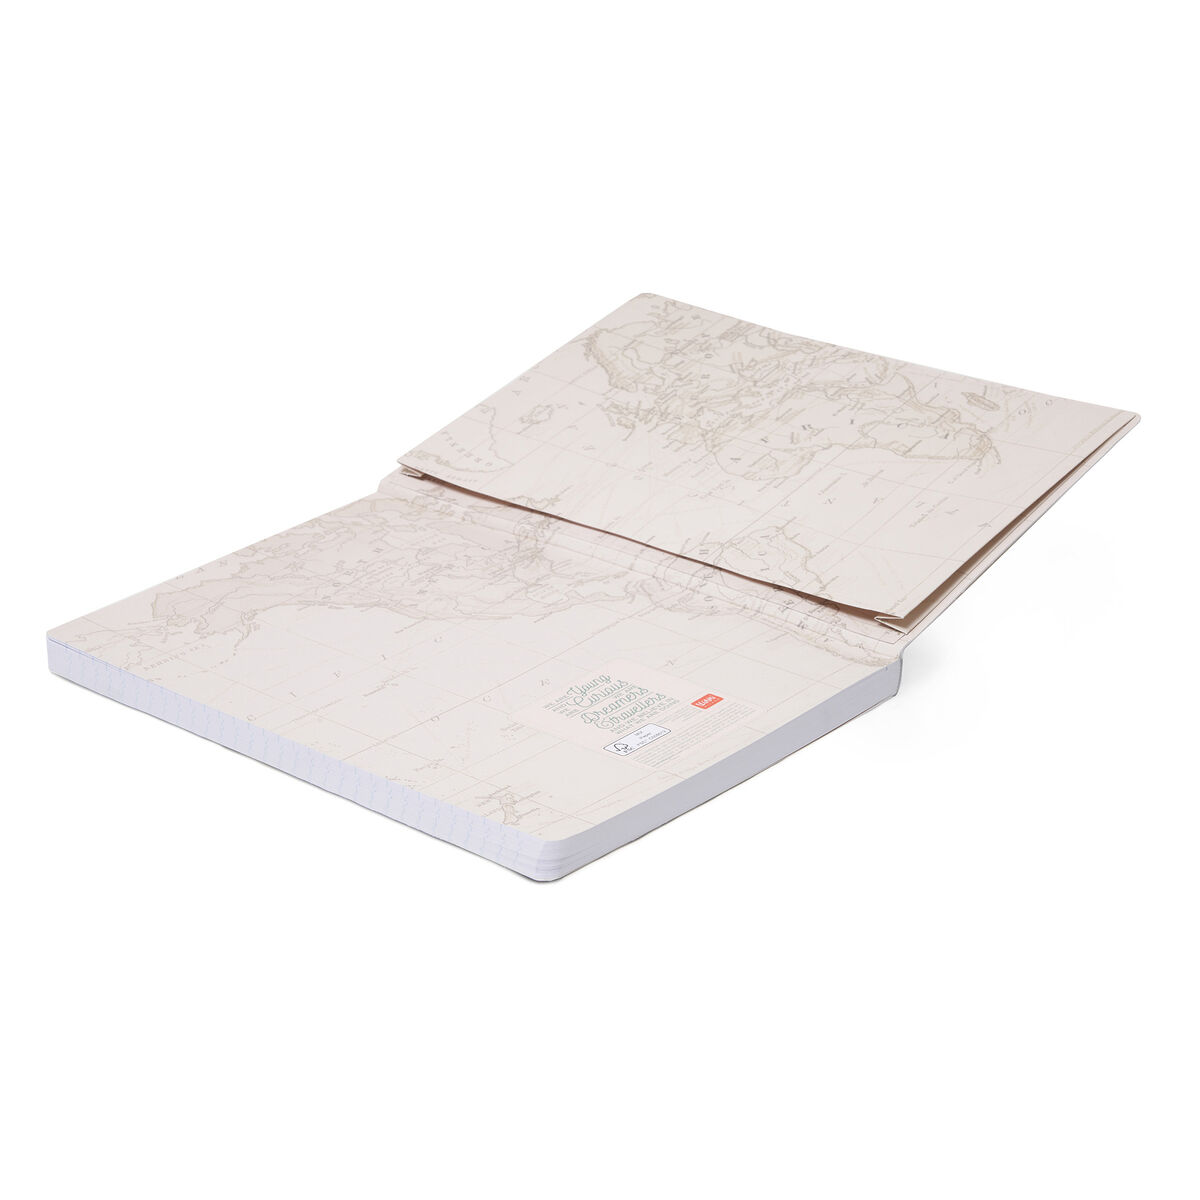 Notebook - Large, , zoo